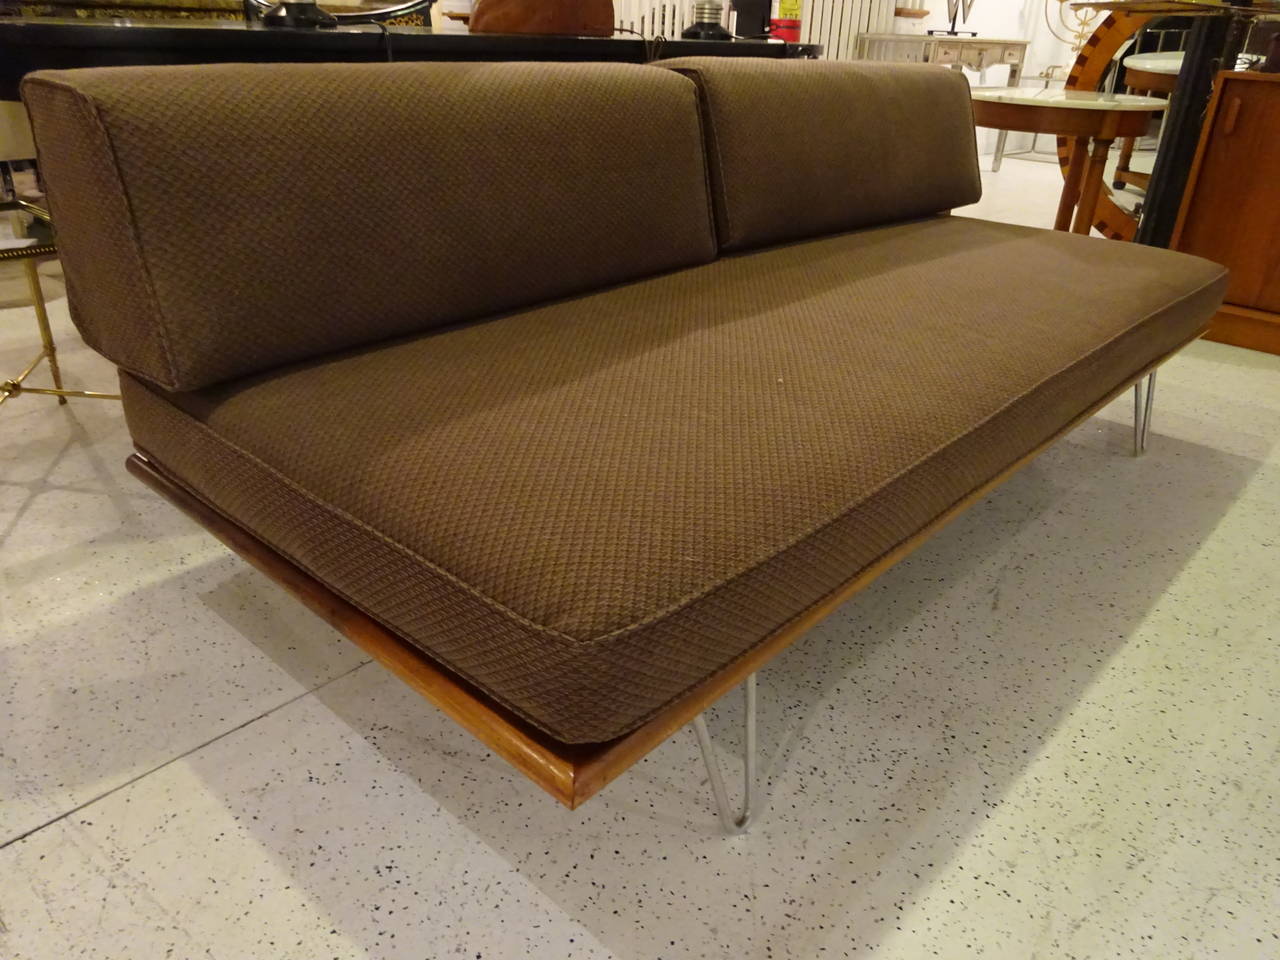 A George Nelson designed day bed with upholstered seat and bolster.